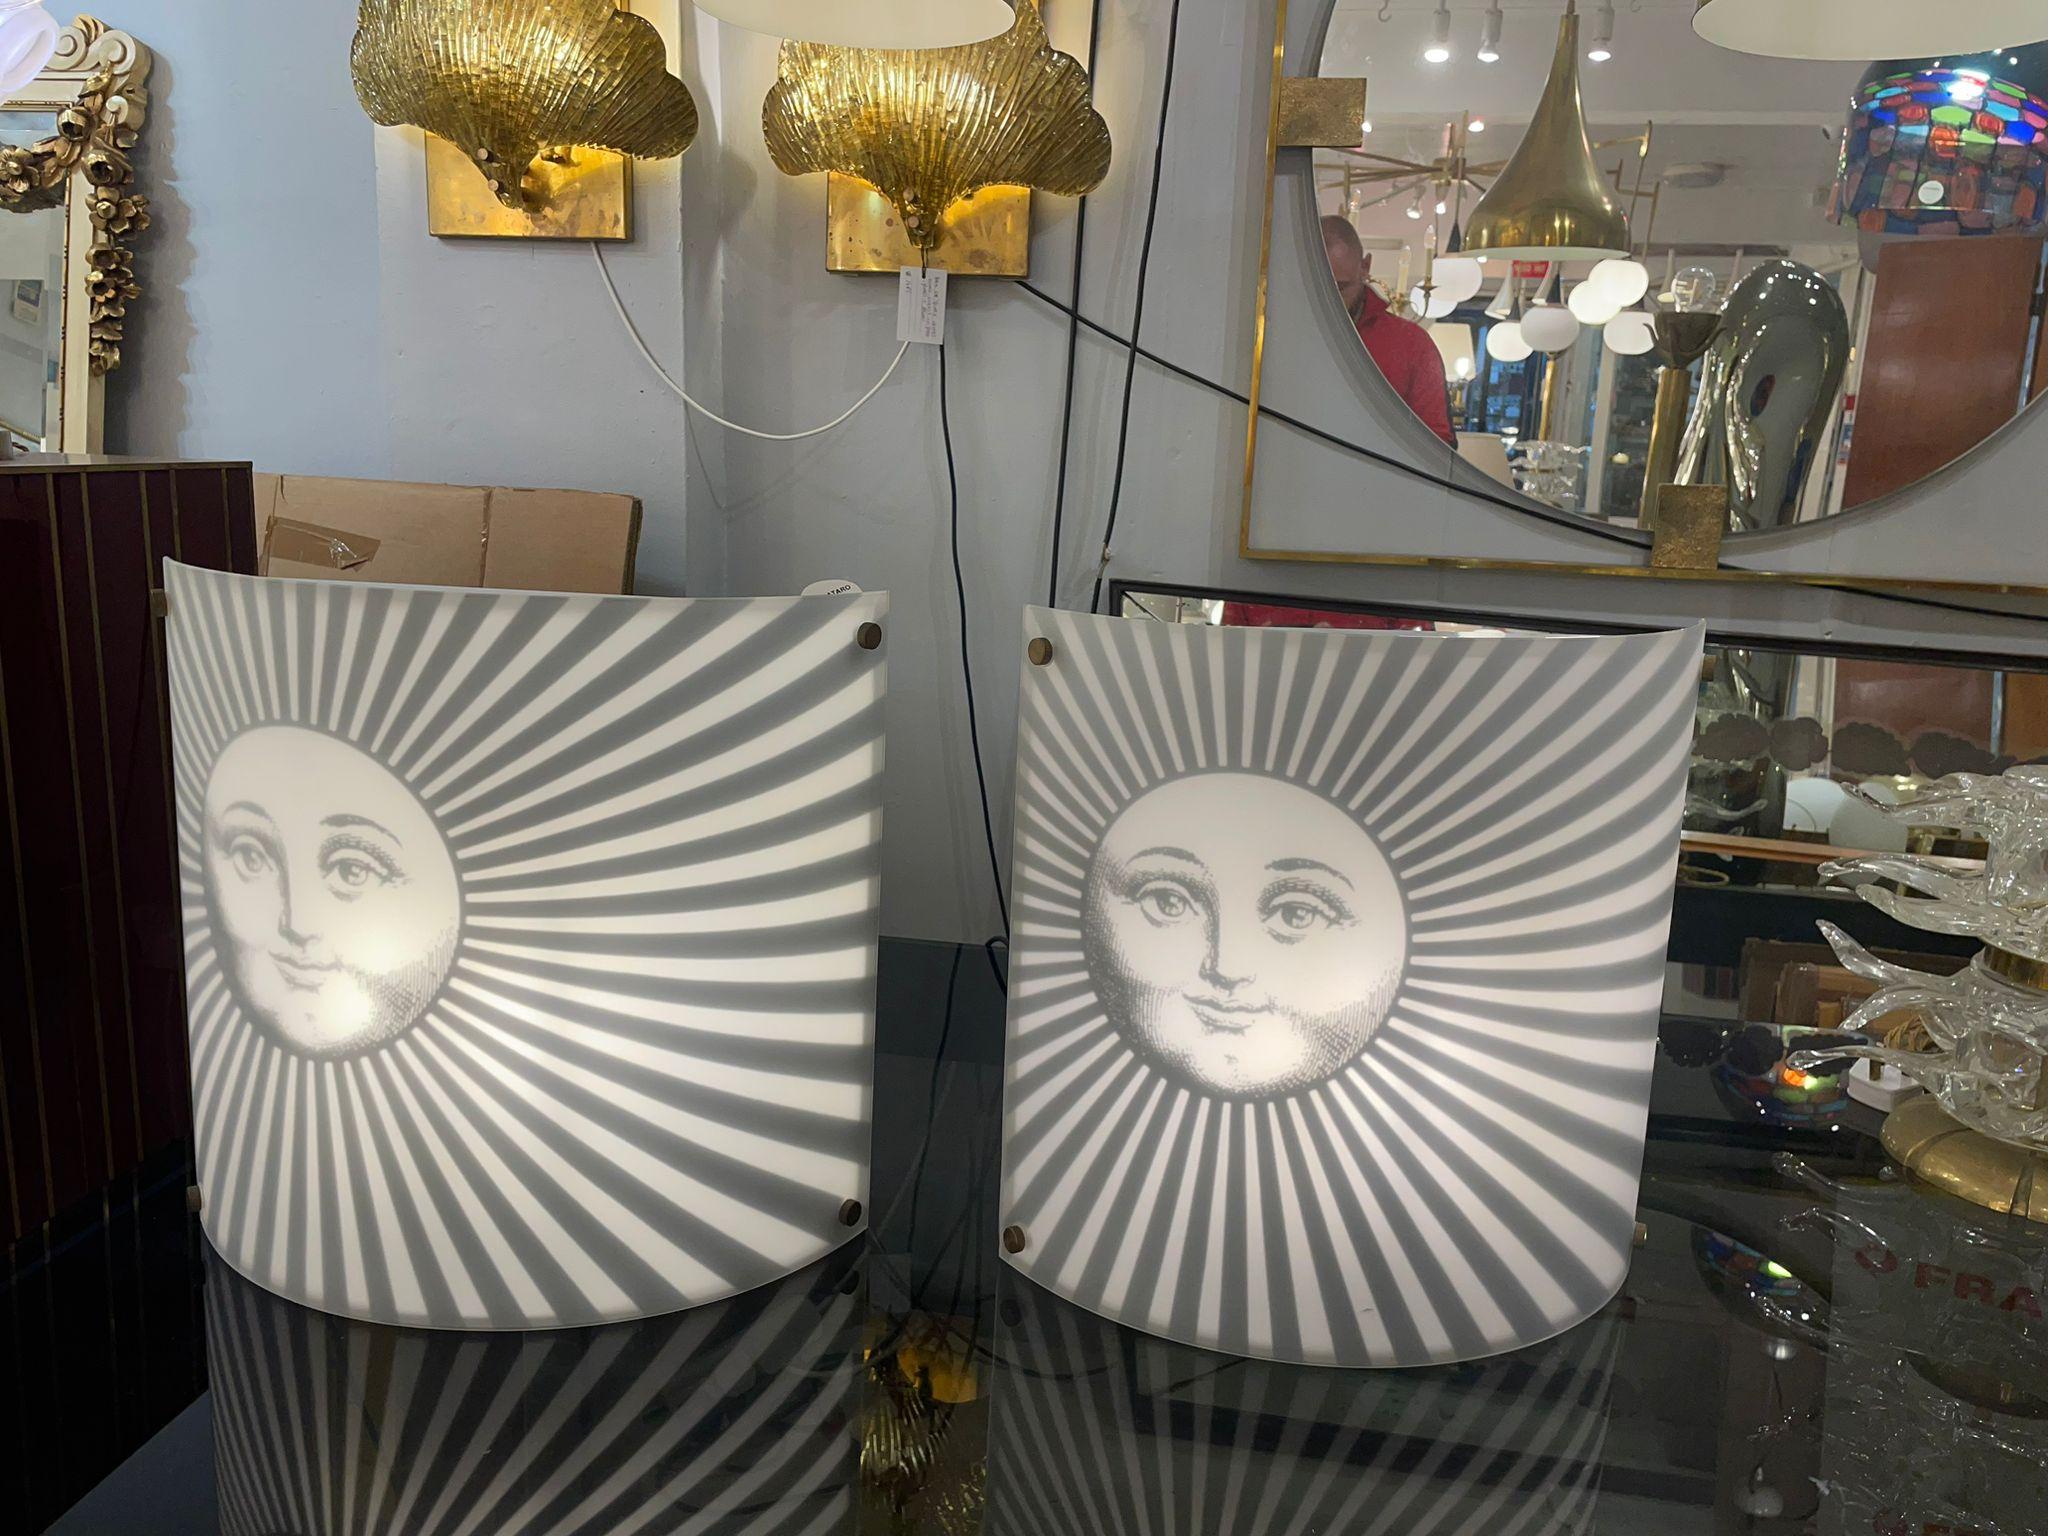 A beautiful pair of wall lights designed by Piero Fornasetti, depicting his muse Lina Cavalieri as a sun spreading bright rays of sunshine.